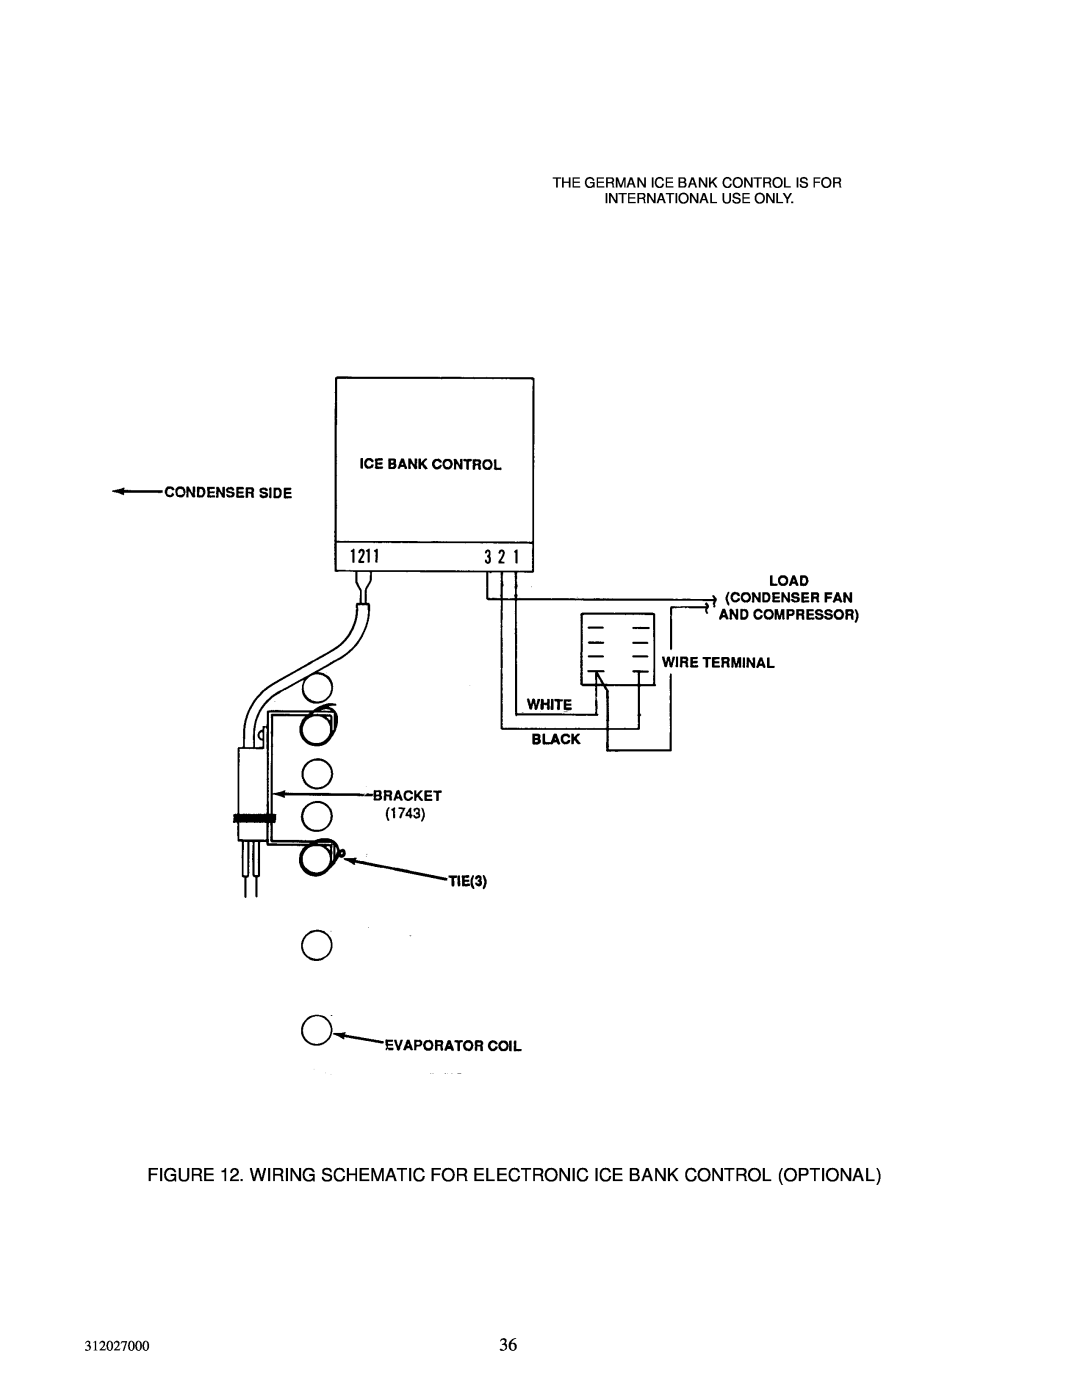 Cornelius R-134A service manual Wiring Schematic For Electronic Ice Bank Control Optional, 312027000 